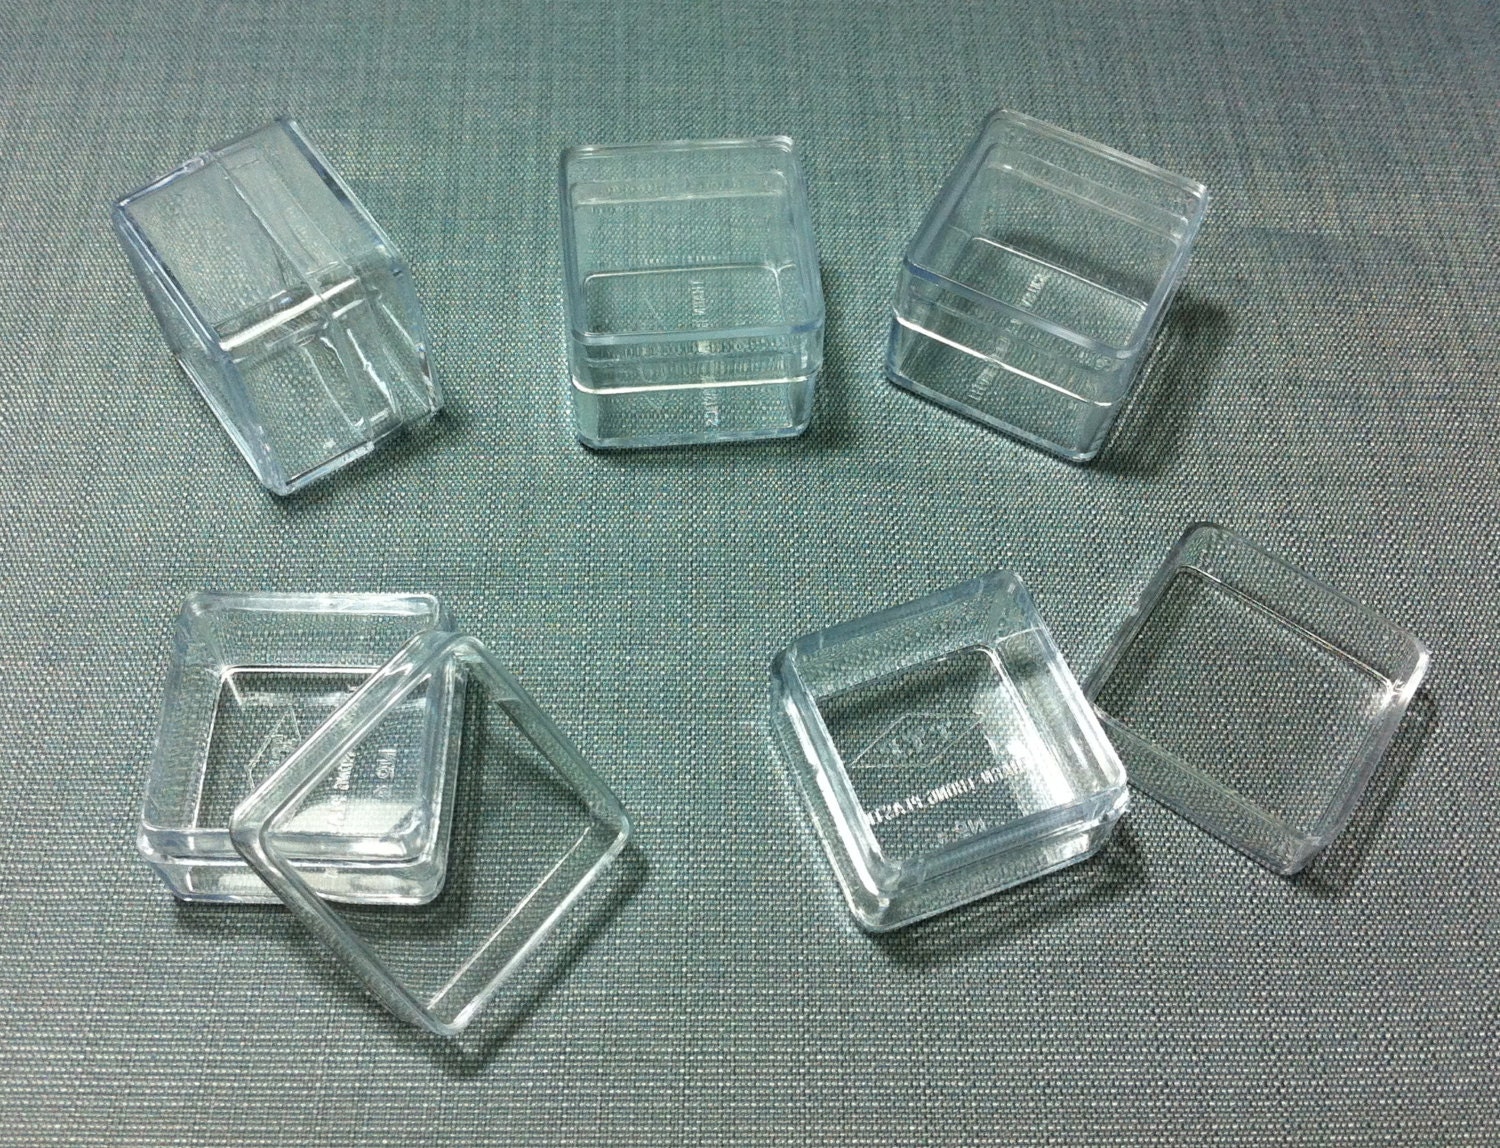 10X Clear Storage Box Small Plastic Case Transparent Container